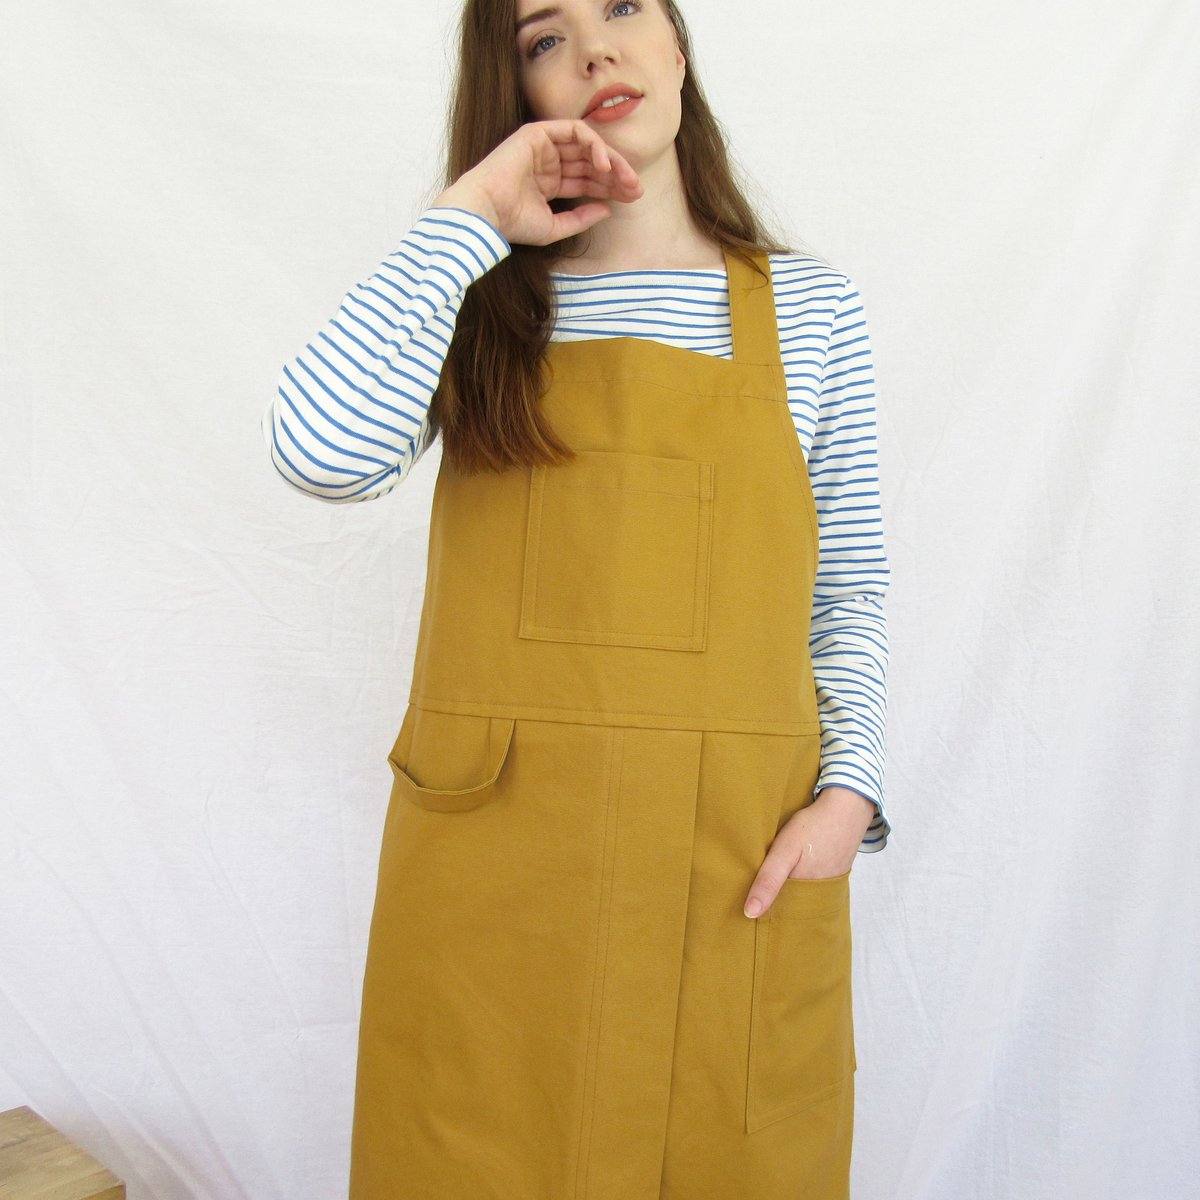 Pottery Apron. Pleated Canvas Pinafore With Split Leg Skirt and